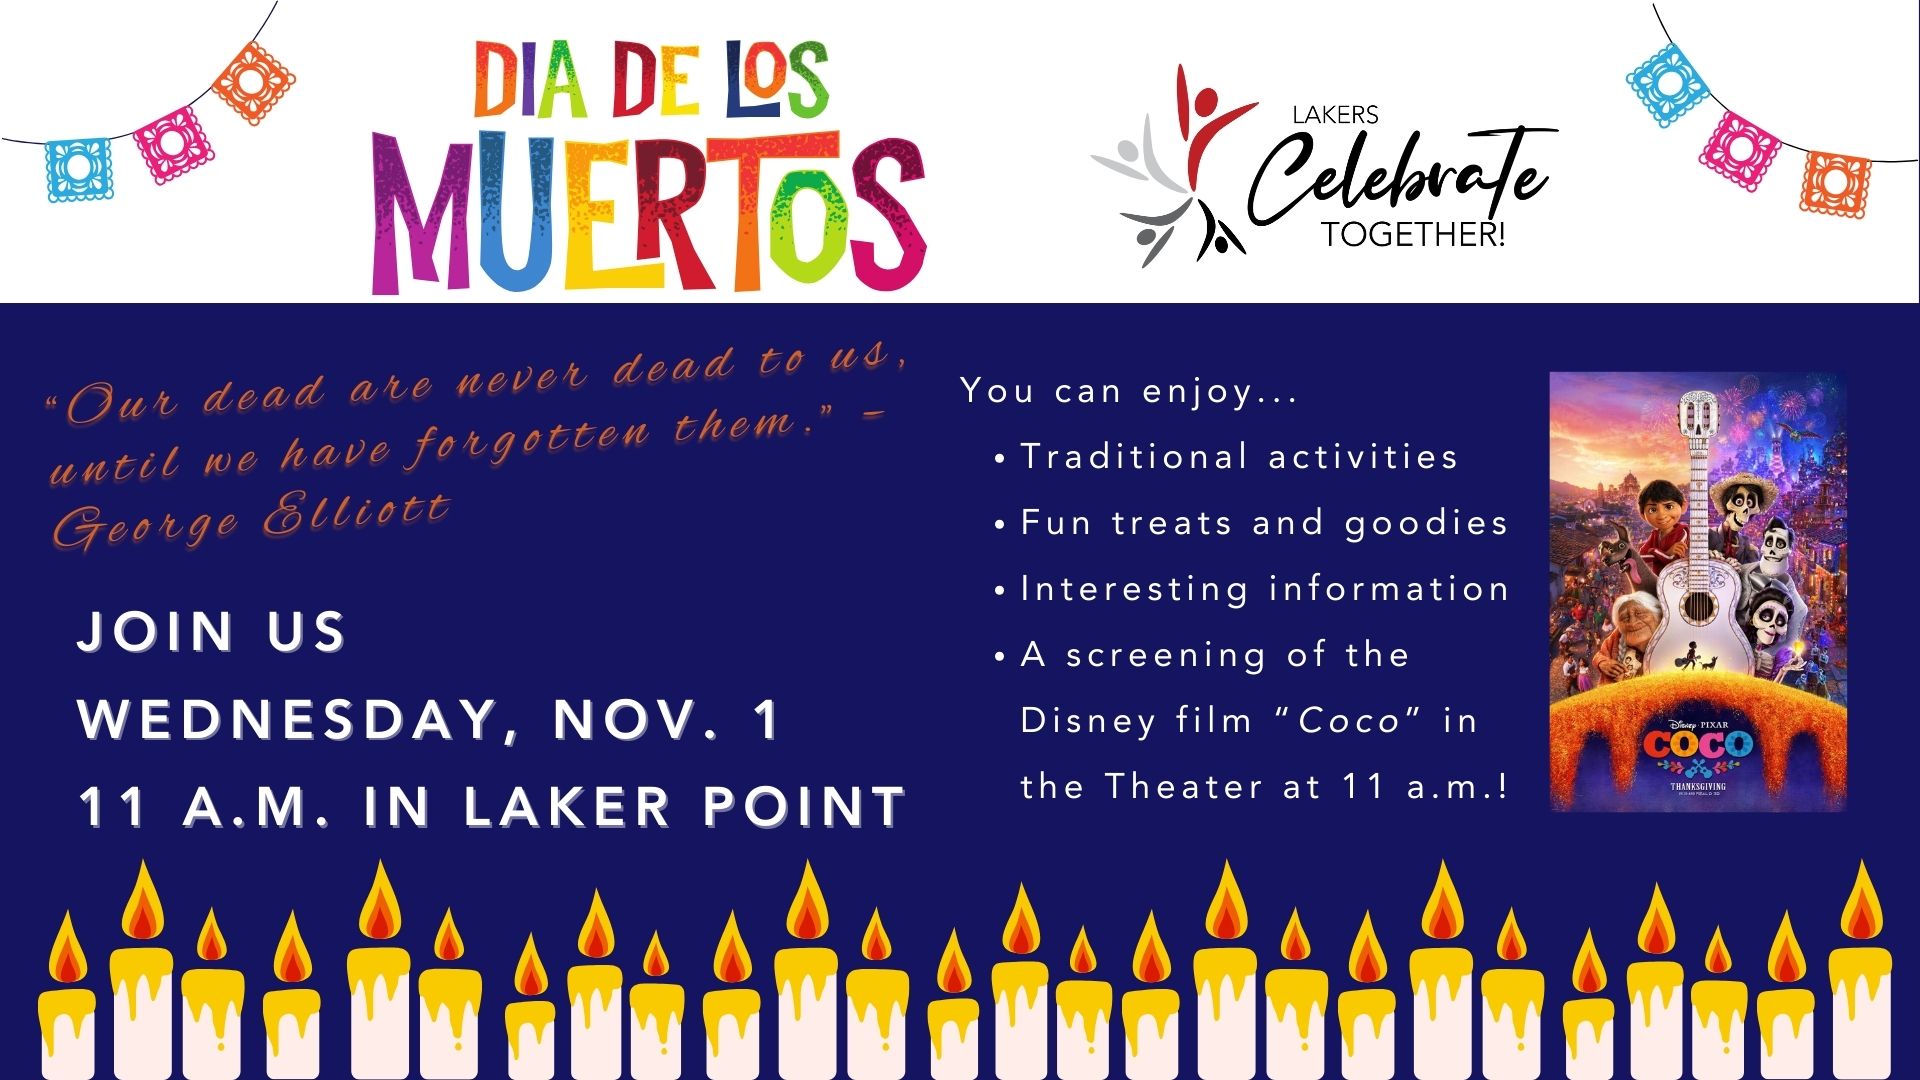 Día de los Muertos decorative image with candles, papel picado, a graphic that reads "Lakers Celebrate Together", and the Coco movie cover